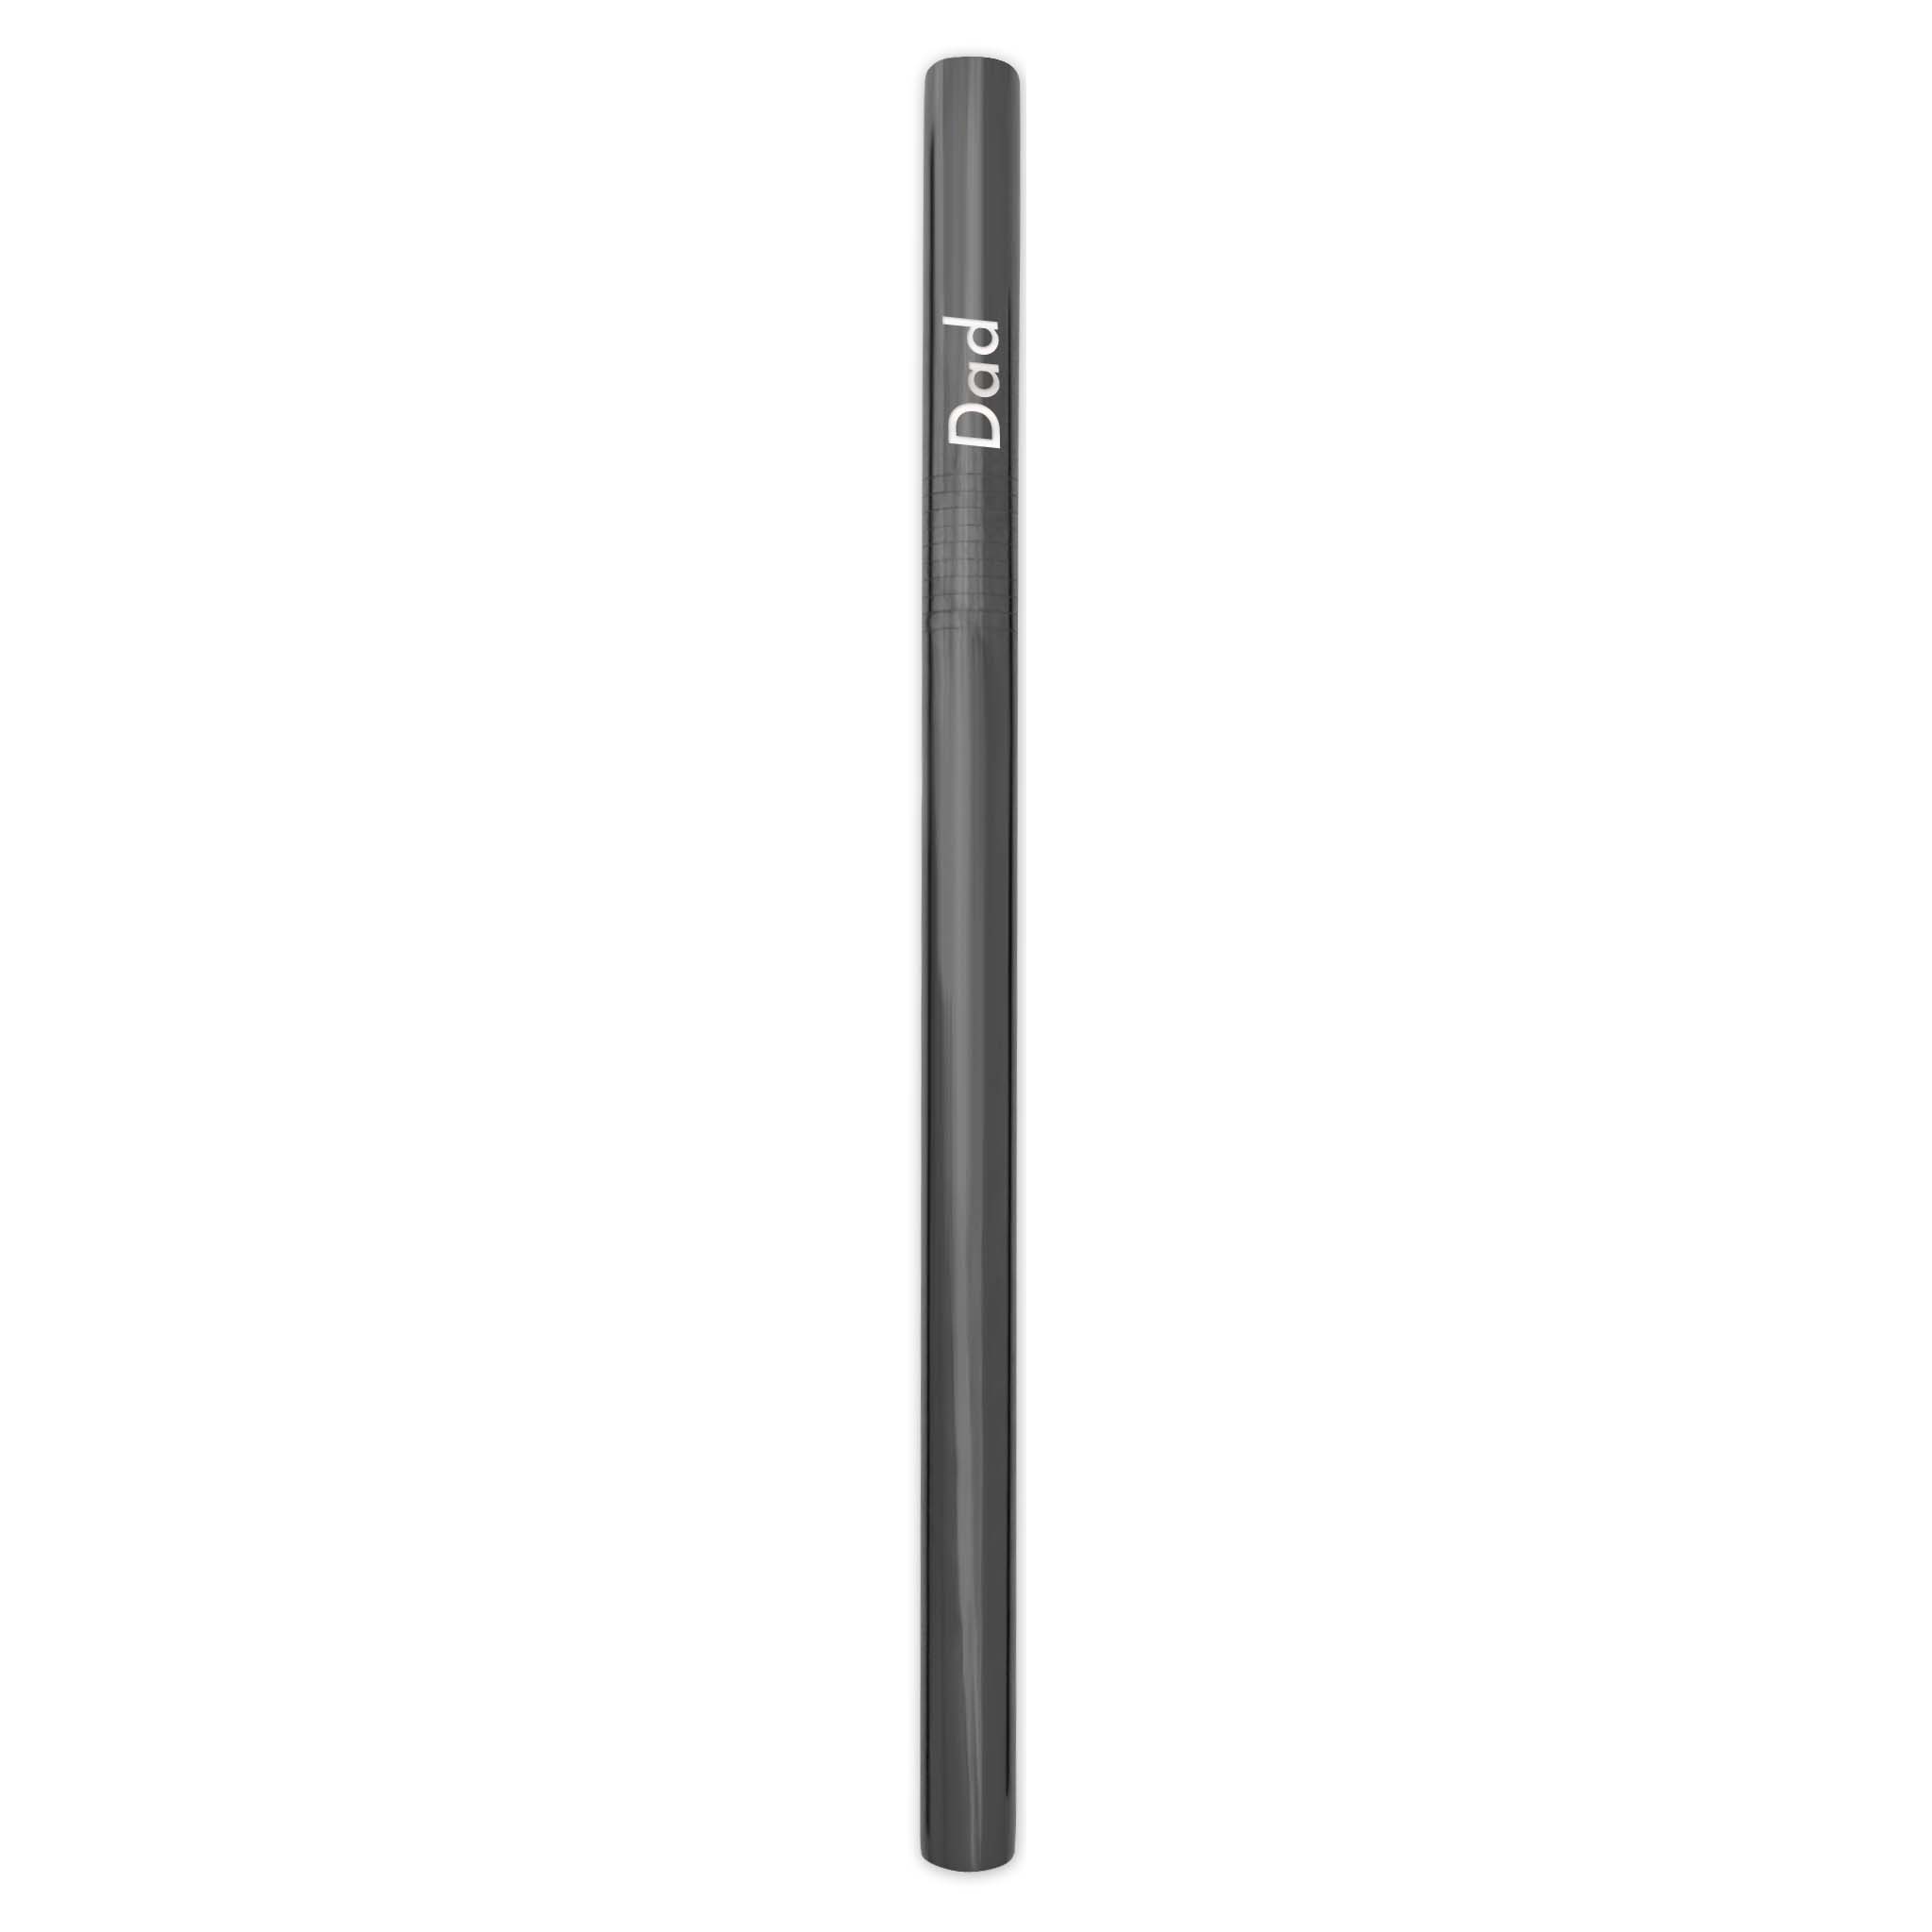 Reusable Stainless Steel Smoothie Straw (Black)